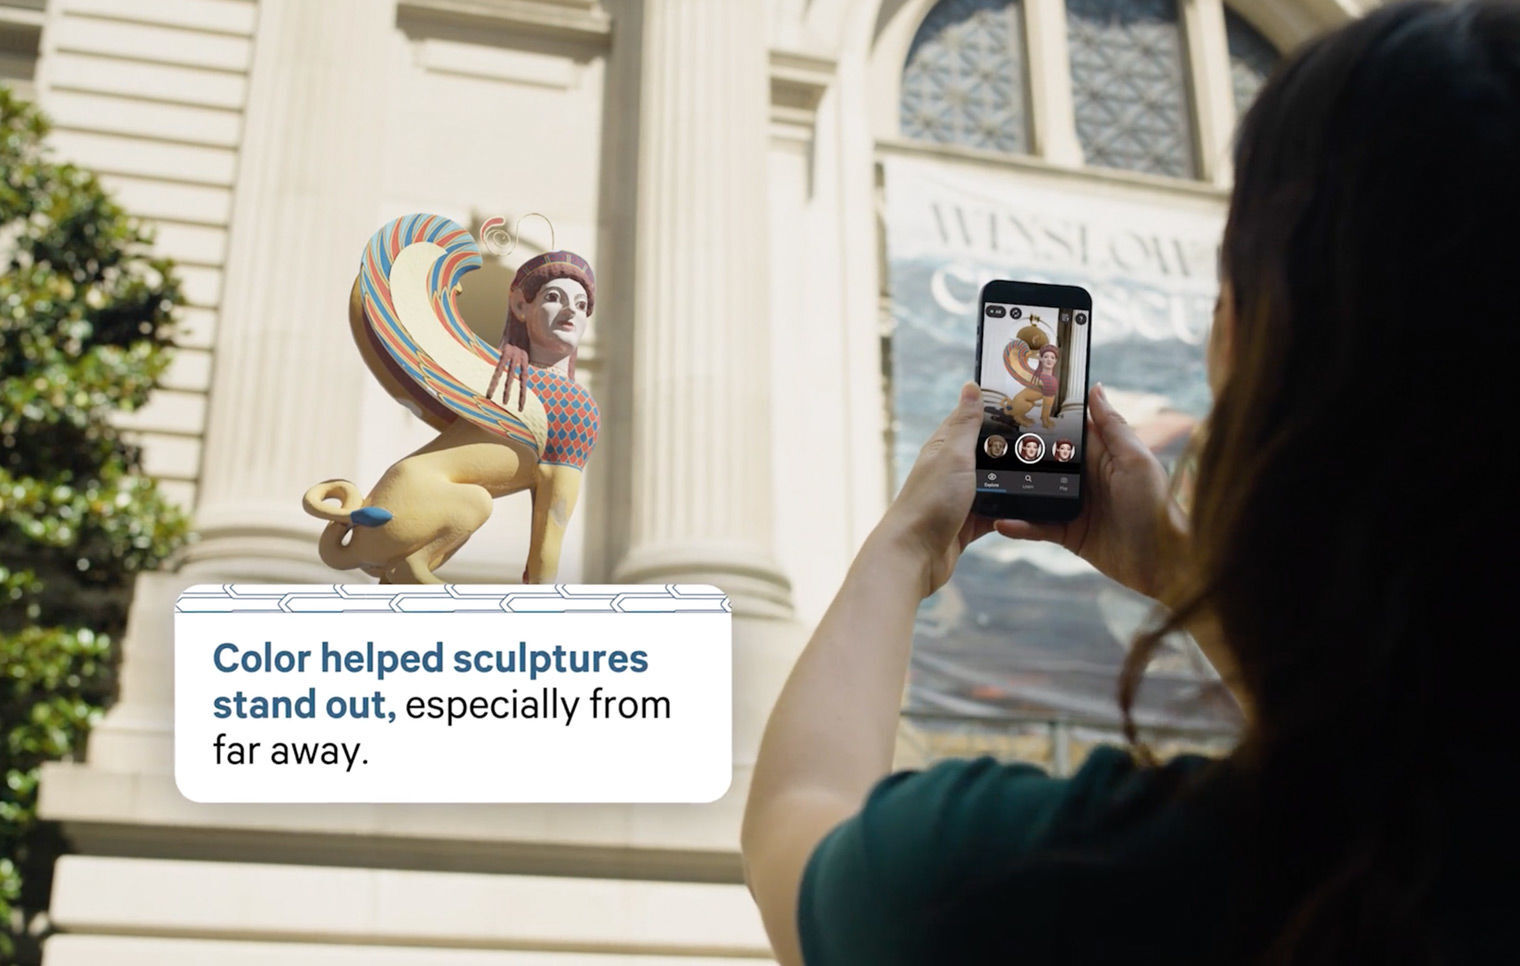 The Metropolitan Museum of Art brings ancient sculptures to life with Chroma AR experience